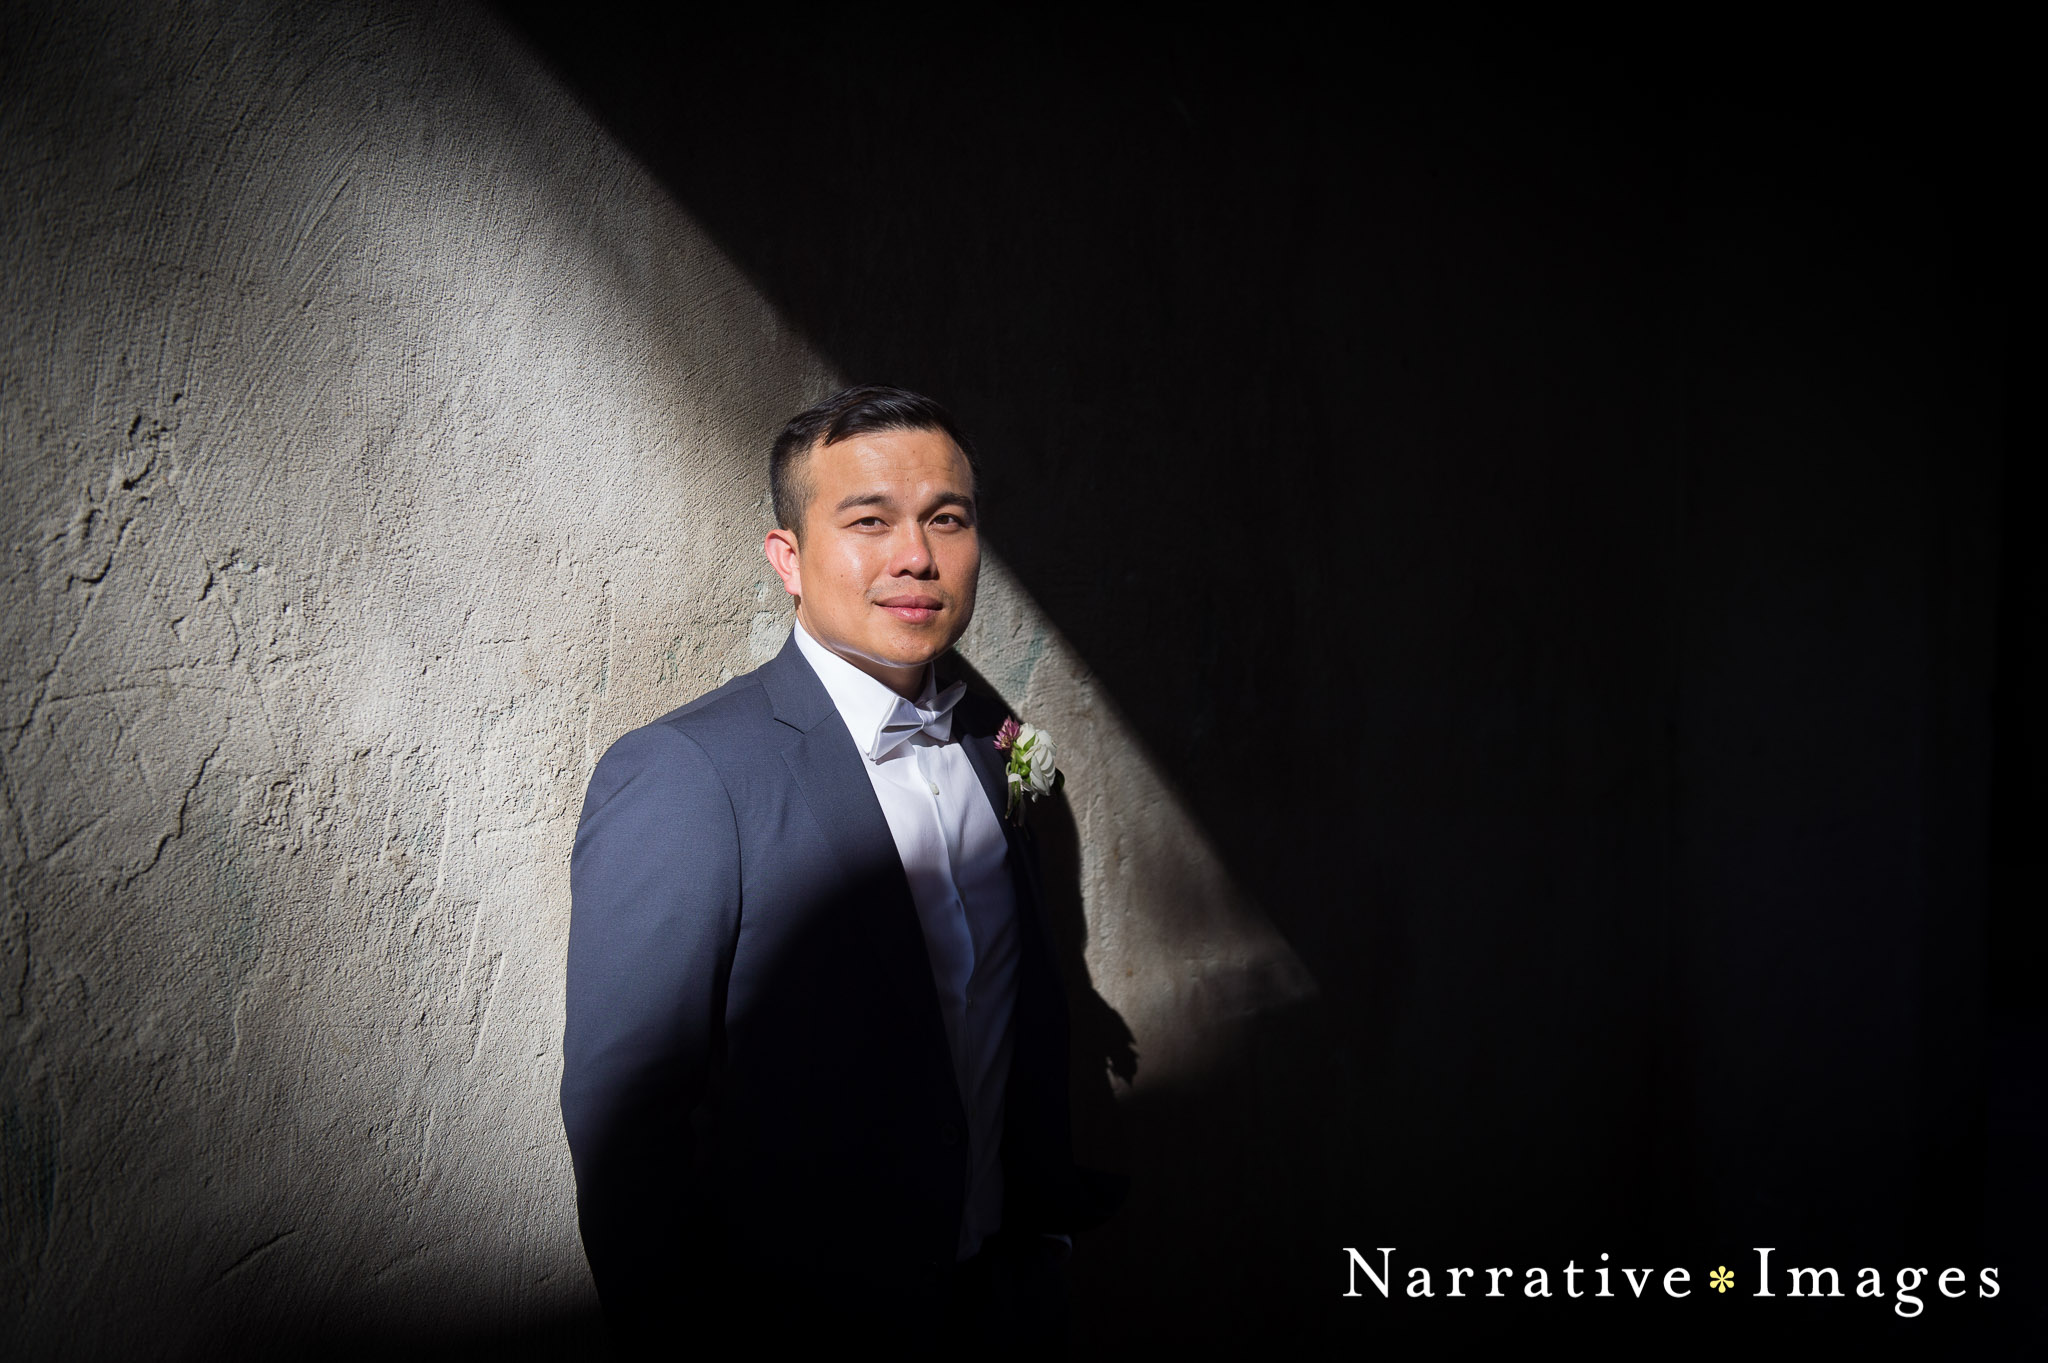 Groom with bowtie stands in light in Balboa Park against concrete wall